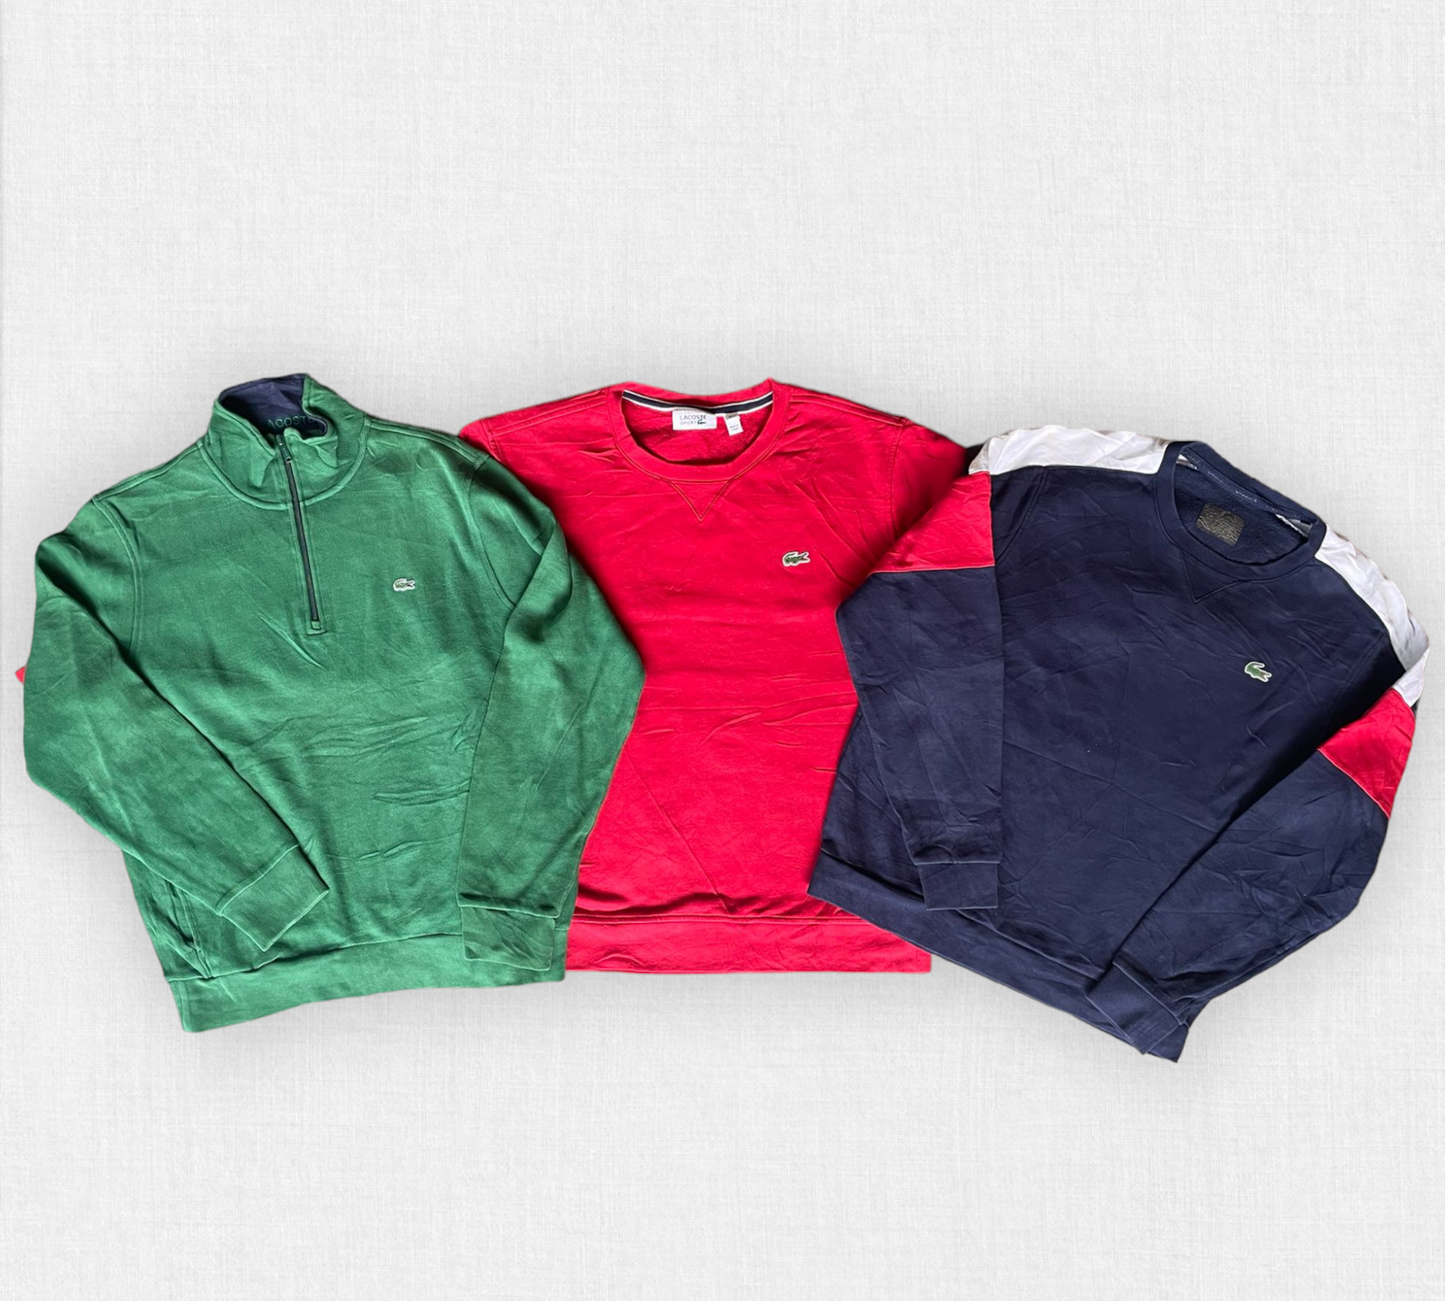 Lacoste clothing mix (10 pieces)